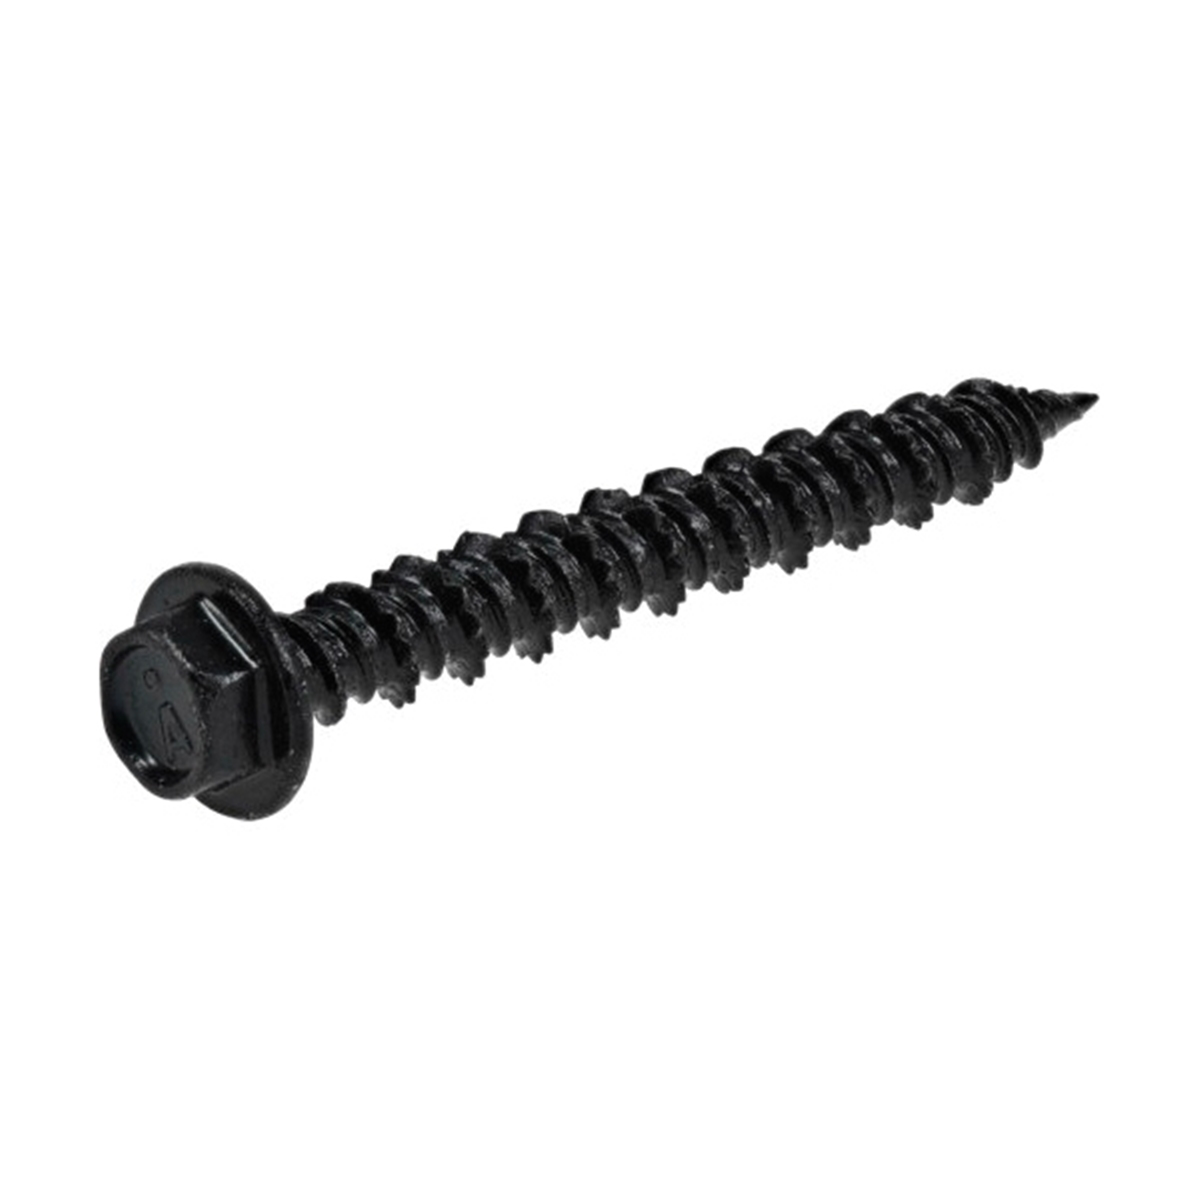 376576 Concrete Screw Anchor, 3/16 in Dia, 1-3/4 in L, Carbon Steel, Epoxy-Coated, 100/PK